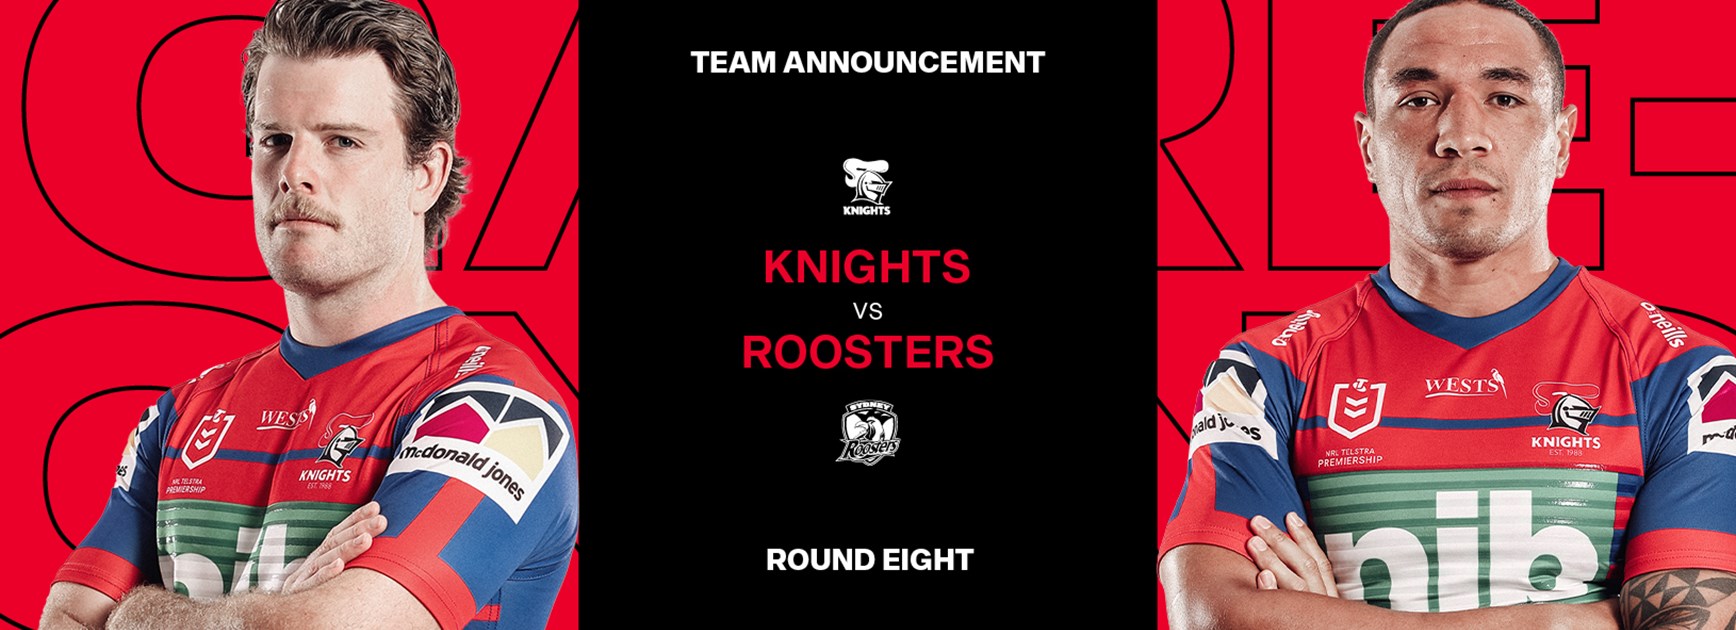 Knights v Roosters Round 8 NRL team list